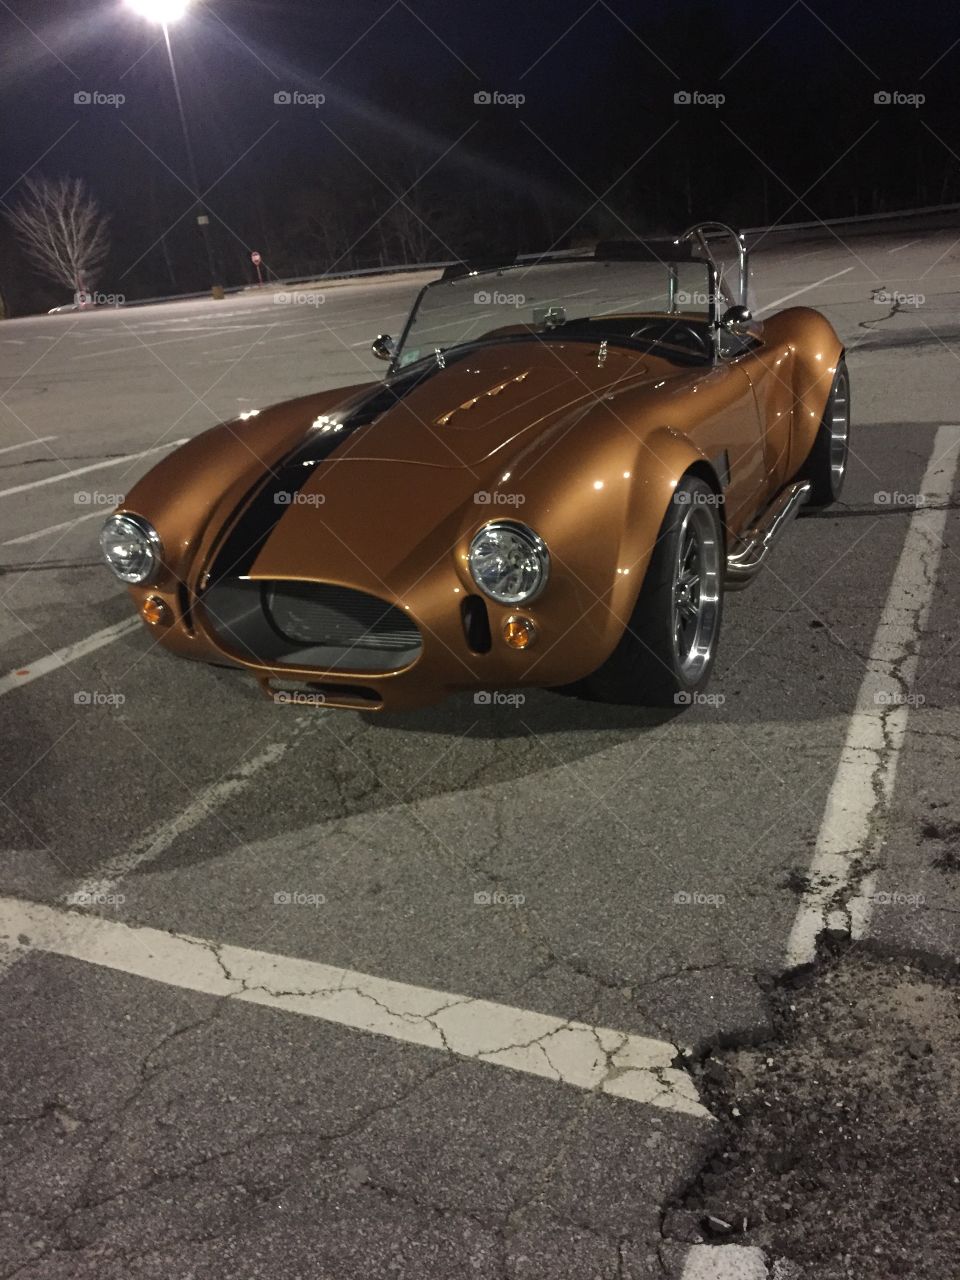 Went for an adventure and saw this creation all alone in the parking lot, the owner said he loves the attention 